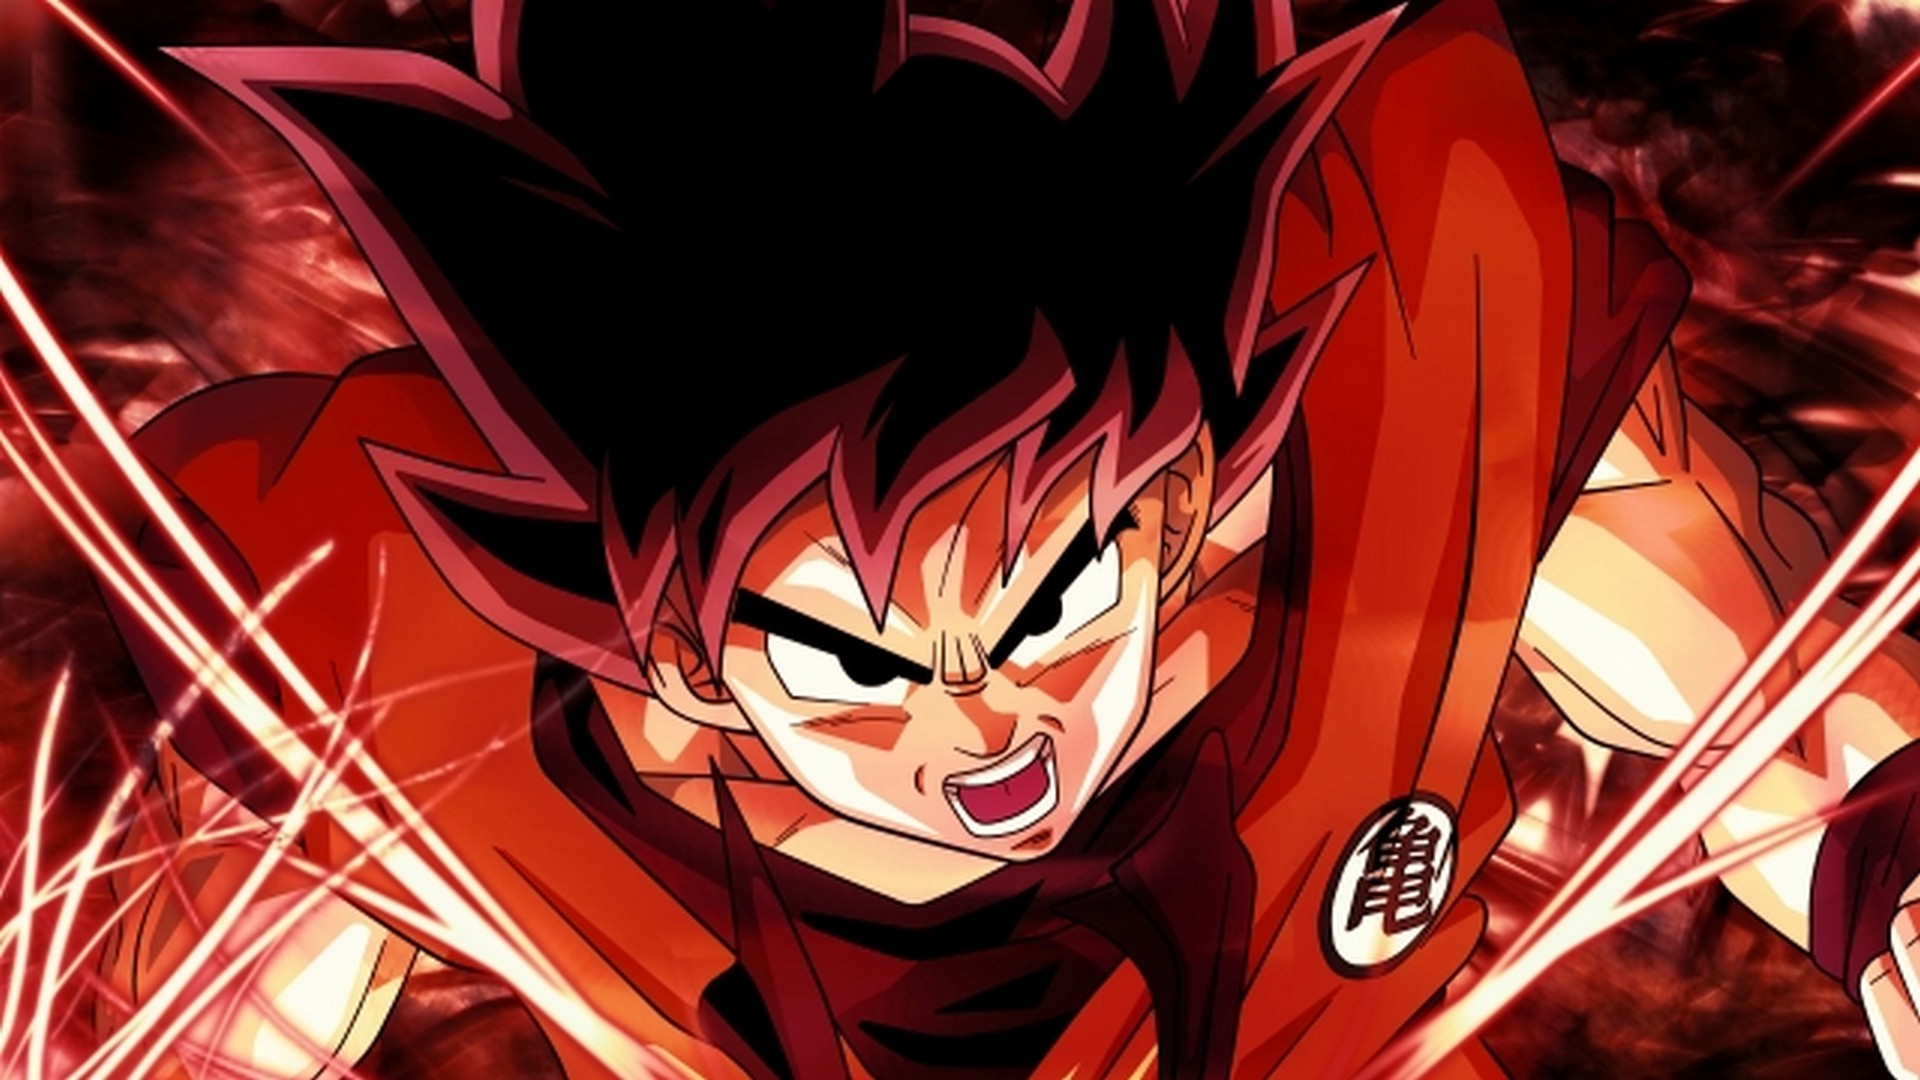 Wallpaper Goku Super Saiyan God HD with image resolution 1920x1080 pixel. You can make this wallpaper for your Desktop Computer Backgrounds, Mac Wallpapers, Android Lock screen or iPhone Screensavers